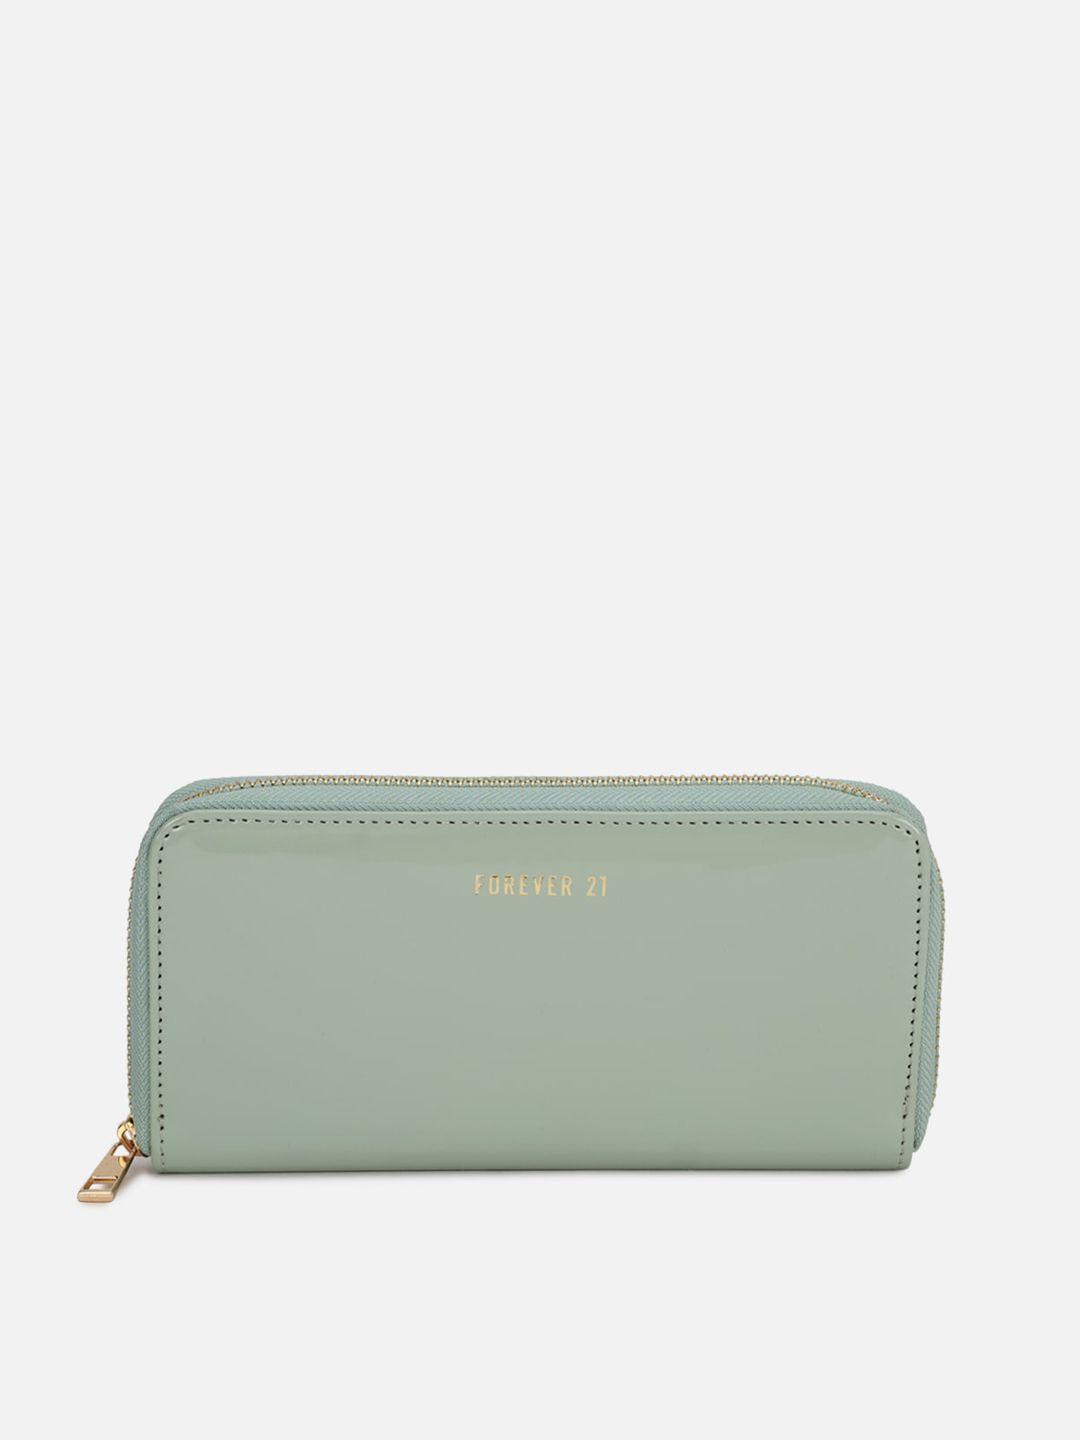 forever 21 green purse clutch